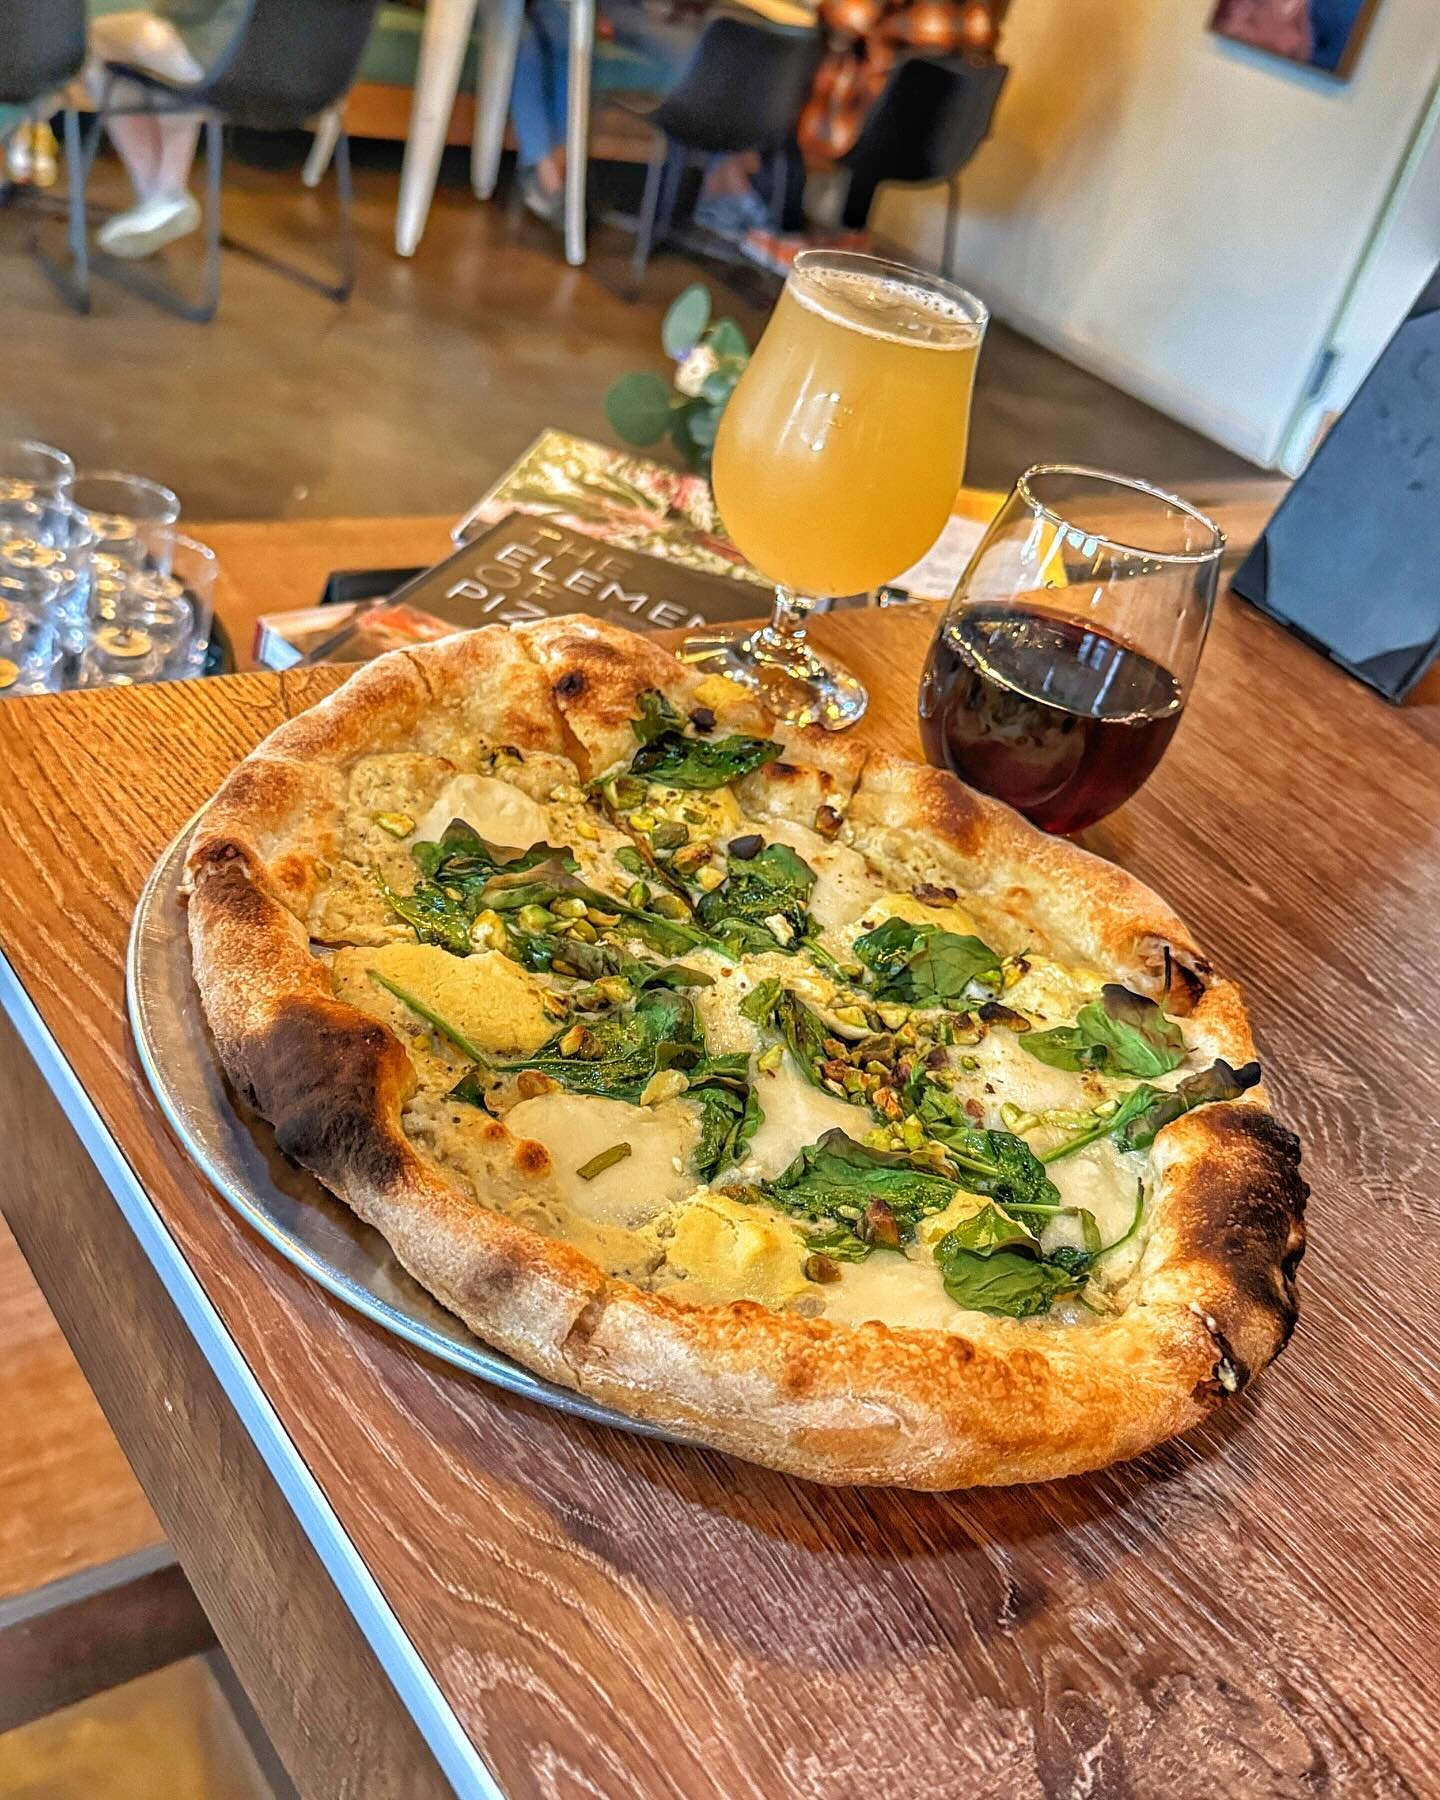 Wednesday Date Night is BOOMING! Are you joining us tonight?!

One pizza and 2 drinks for $30. Can&rsquo;t beat that!

📍 LA : 4720 Woodman Ave, Sherman Oaks, CA 91423
📍 SD: 2949 Fifth Ave, San Diego, CA 92103

NEW EXTENDED HOURS Friday &amp; Saturd